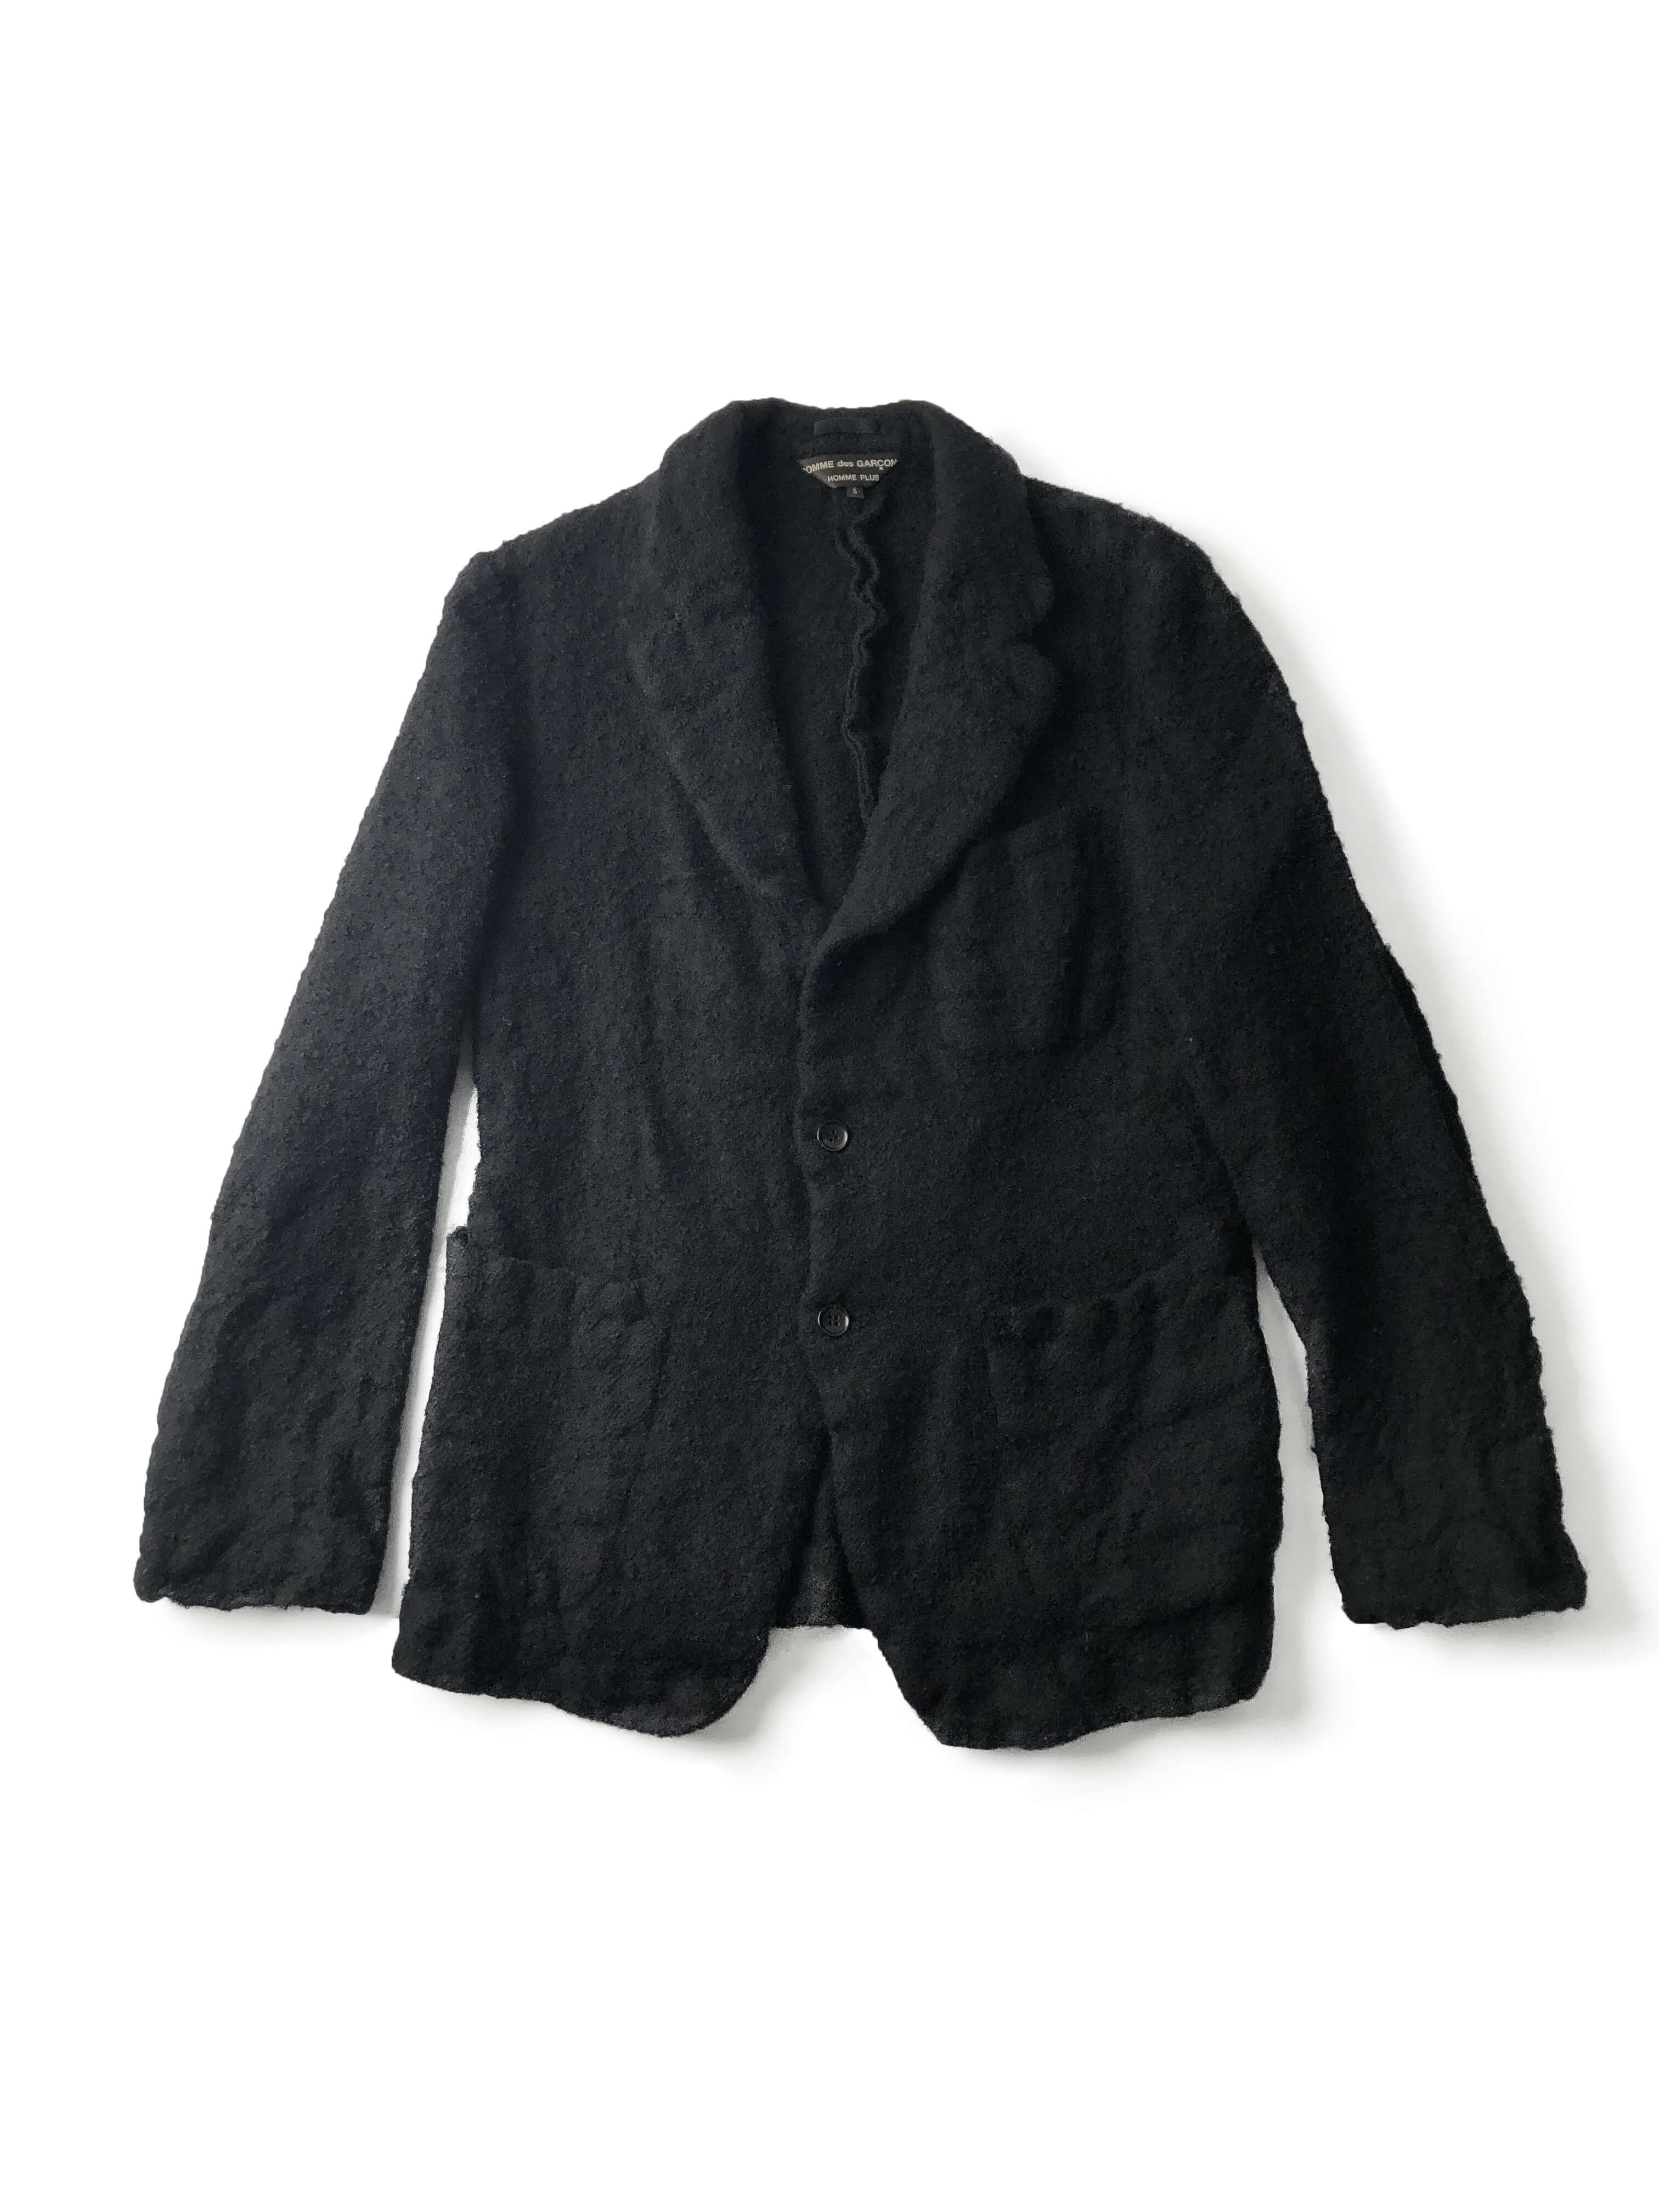 COMME des GARCONS HOMME PLUS 2003aw boiled wool jacket